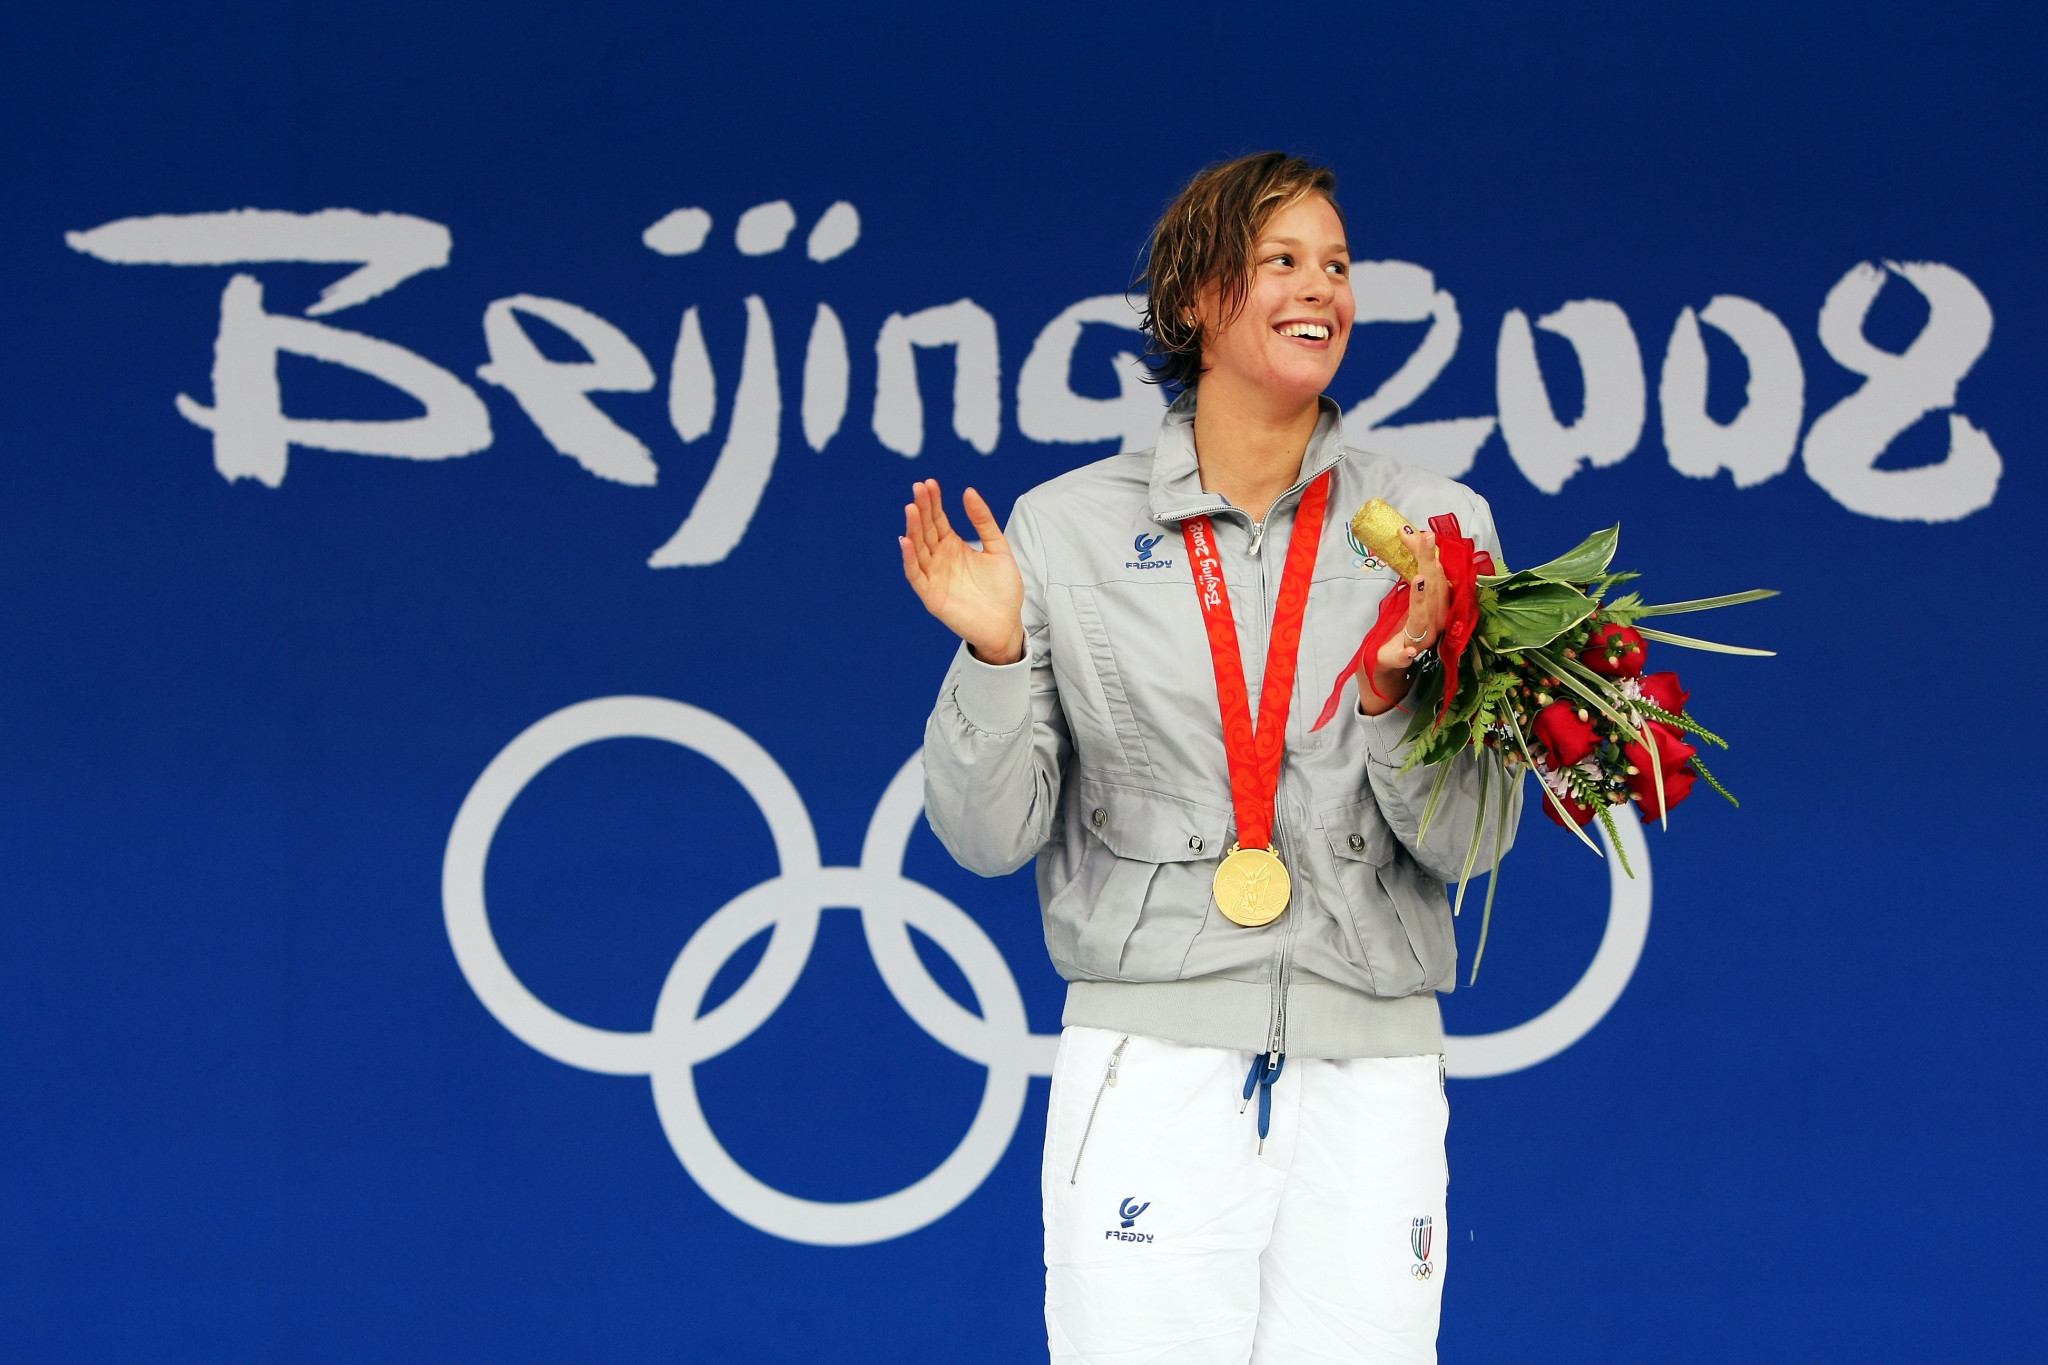 Federica Pellegrini earned Olympic gold at Beijing 2008 ©Getty Images